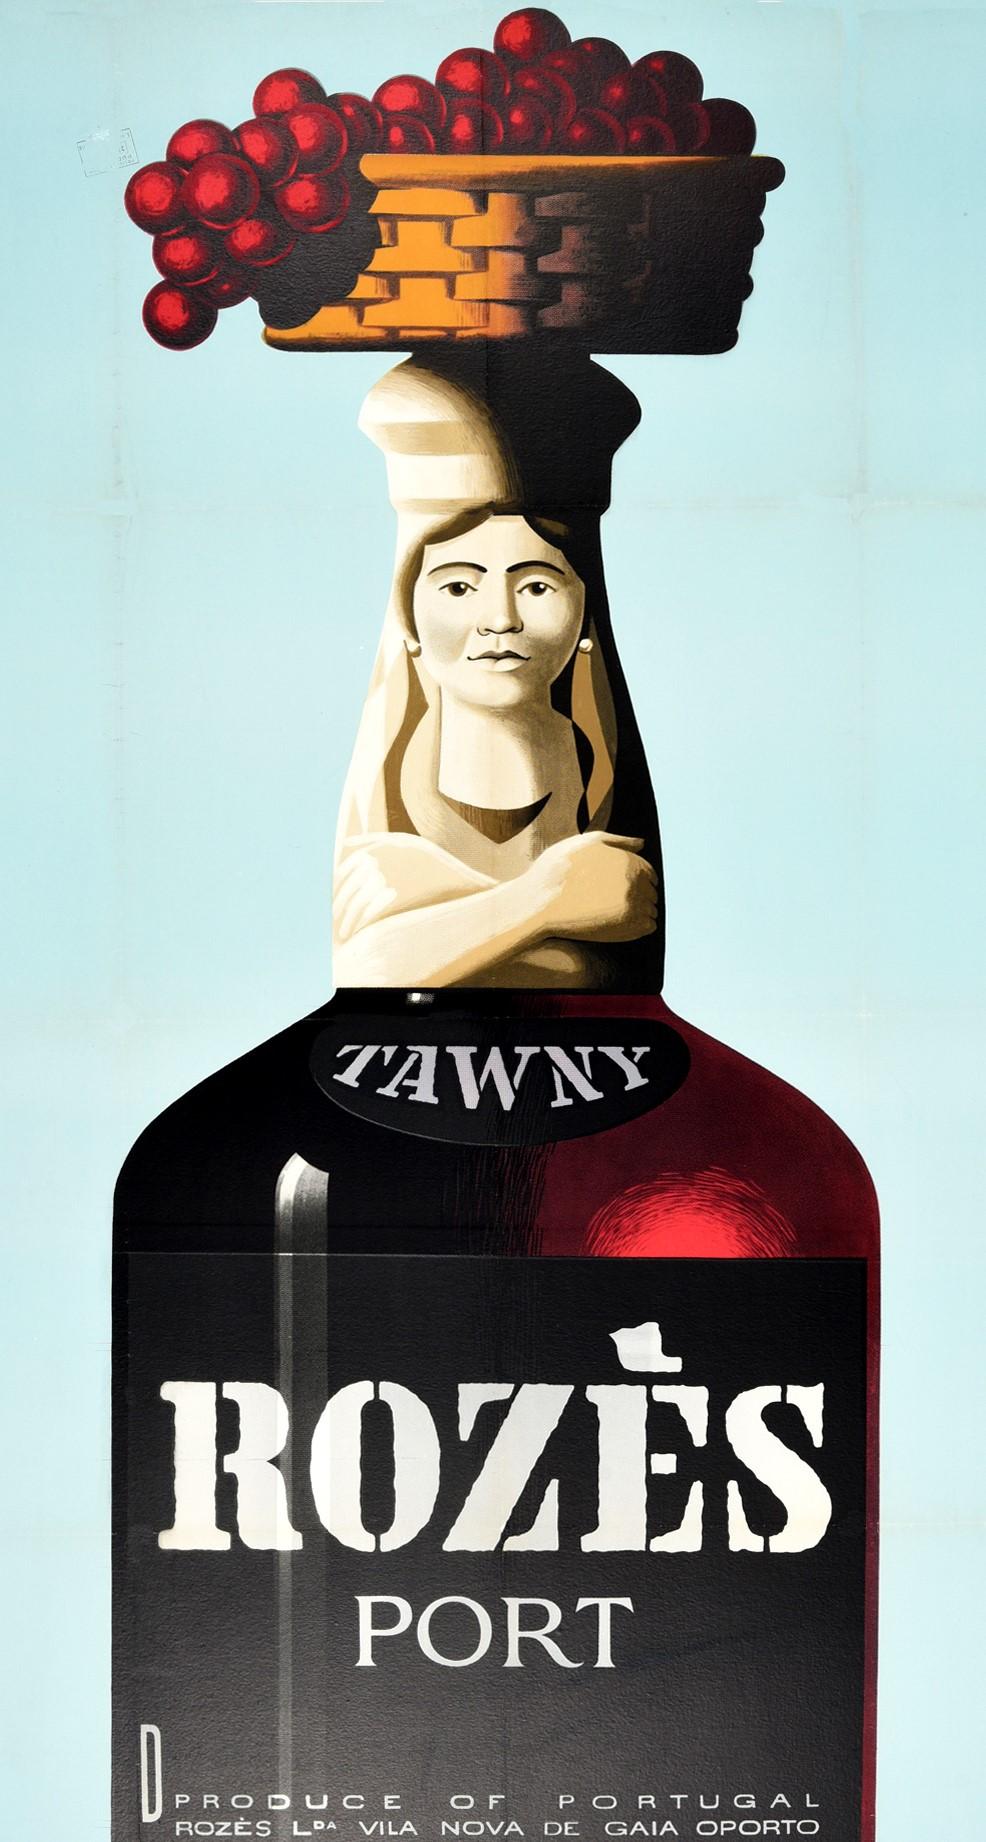 Original Vintage Drink Advertising Poster Tawny Rozes Port Wine Portugal Oporto In Good Condition For Sale In London, GB